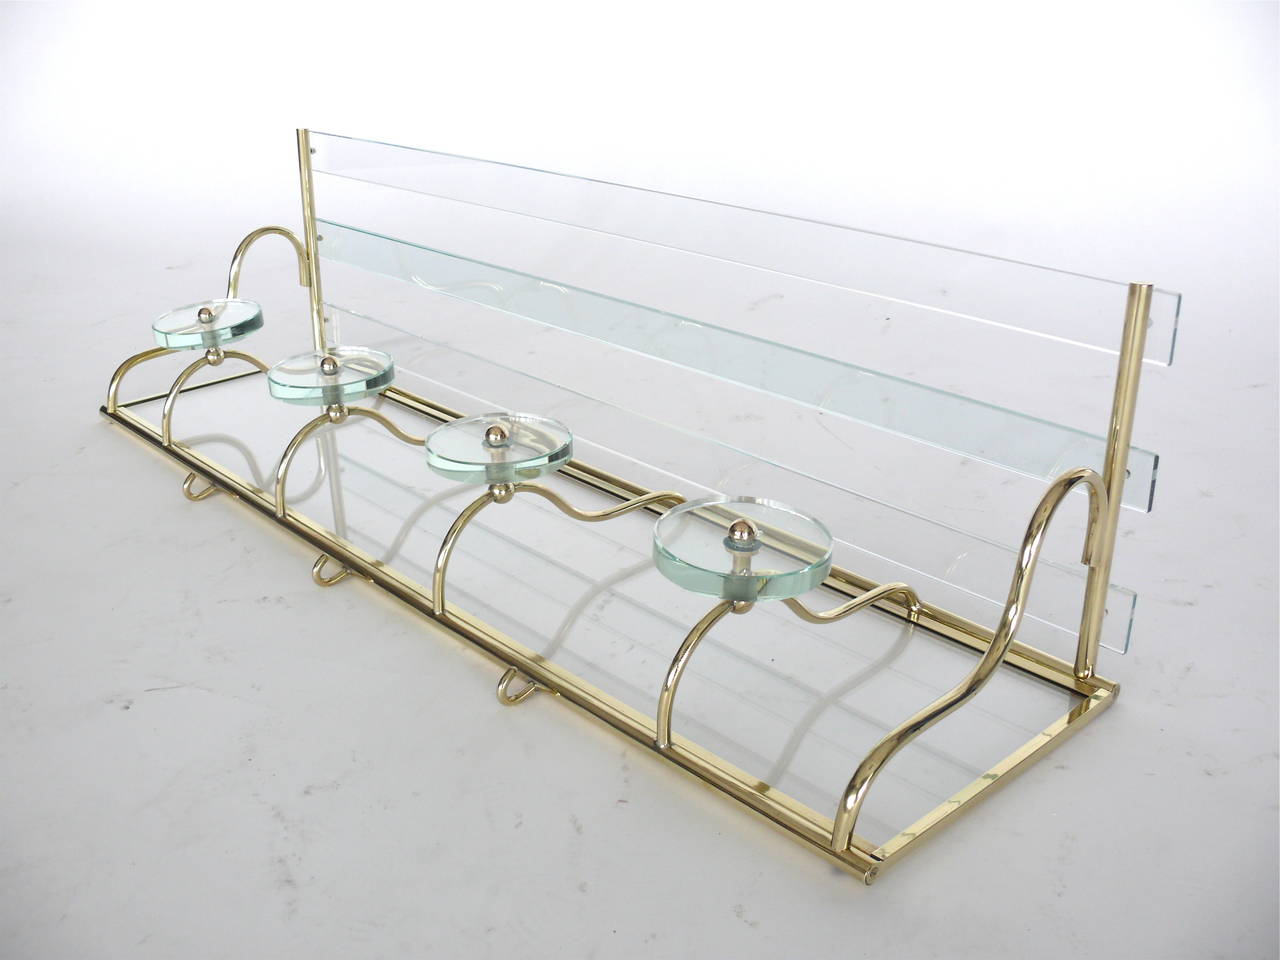 Fantastic Italian coat rack in the style of Fontana Arte. Made with four glass disc hooks, mirrored back, slated glass shelf and brass hardware with great patina. Three small brass hooks on underside of rack. Very similar rack also available.